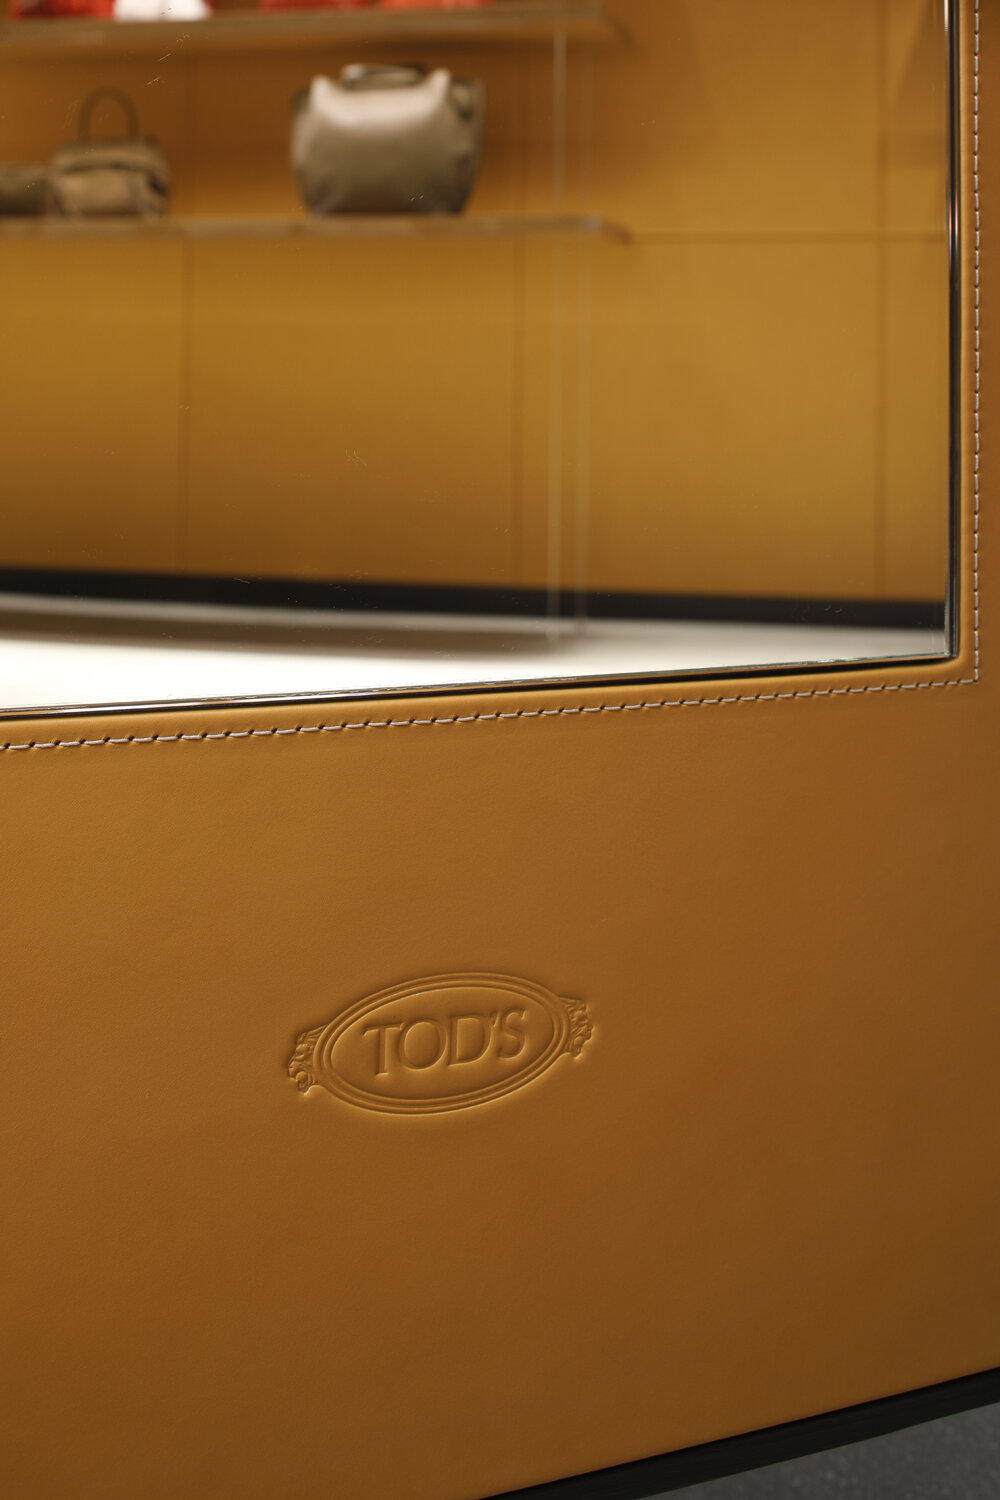  Tod’s Miami - Leather Embossed Tod’s Logo  